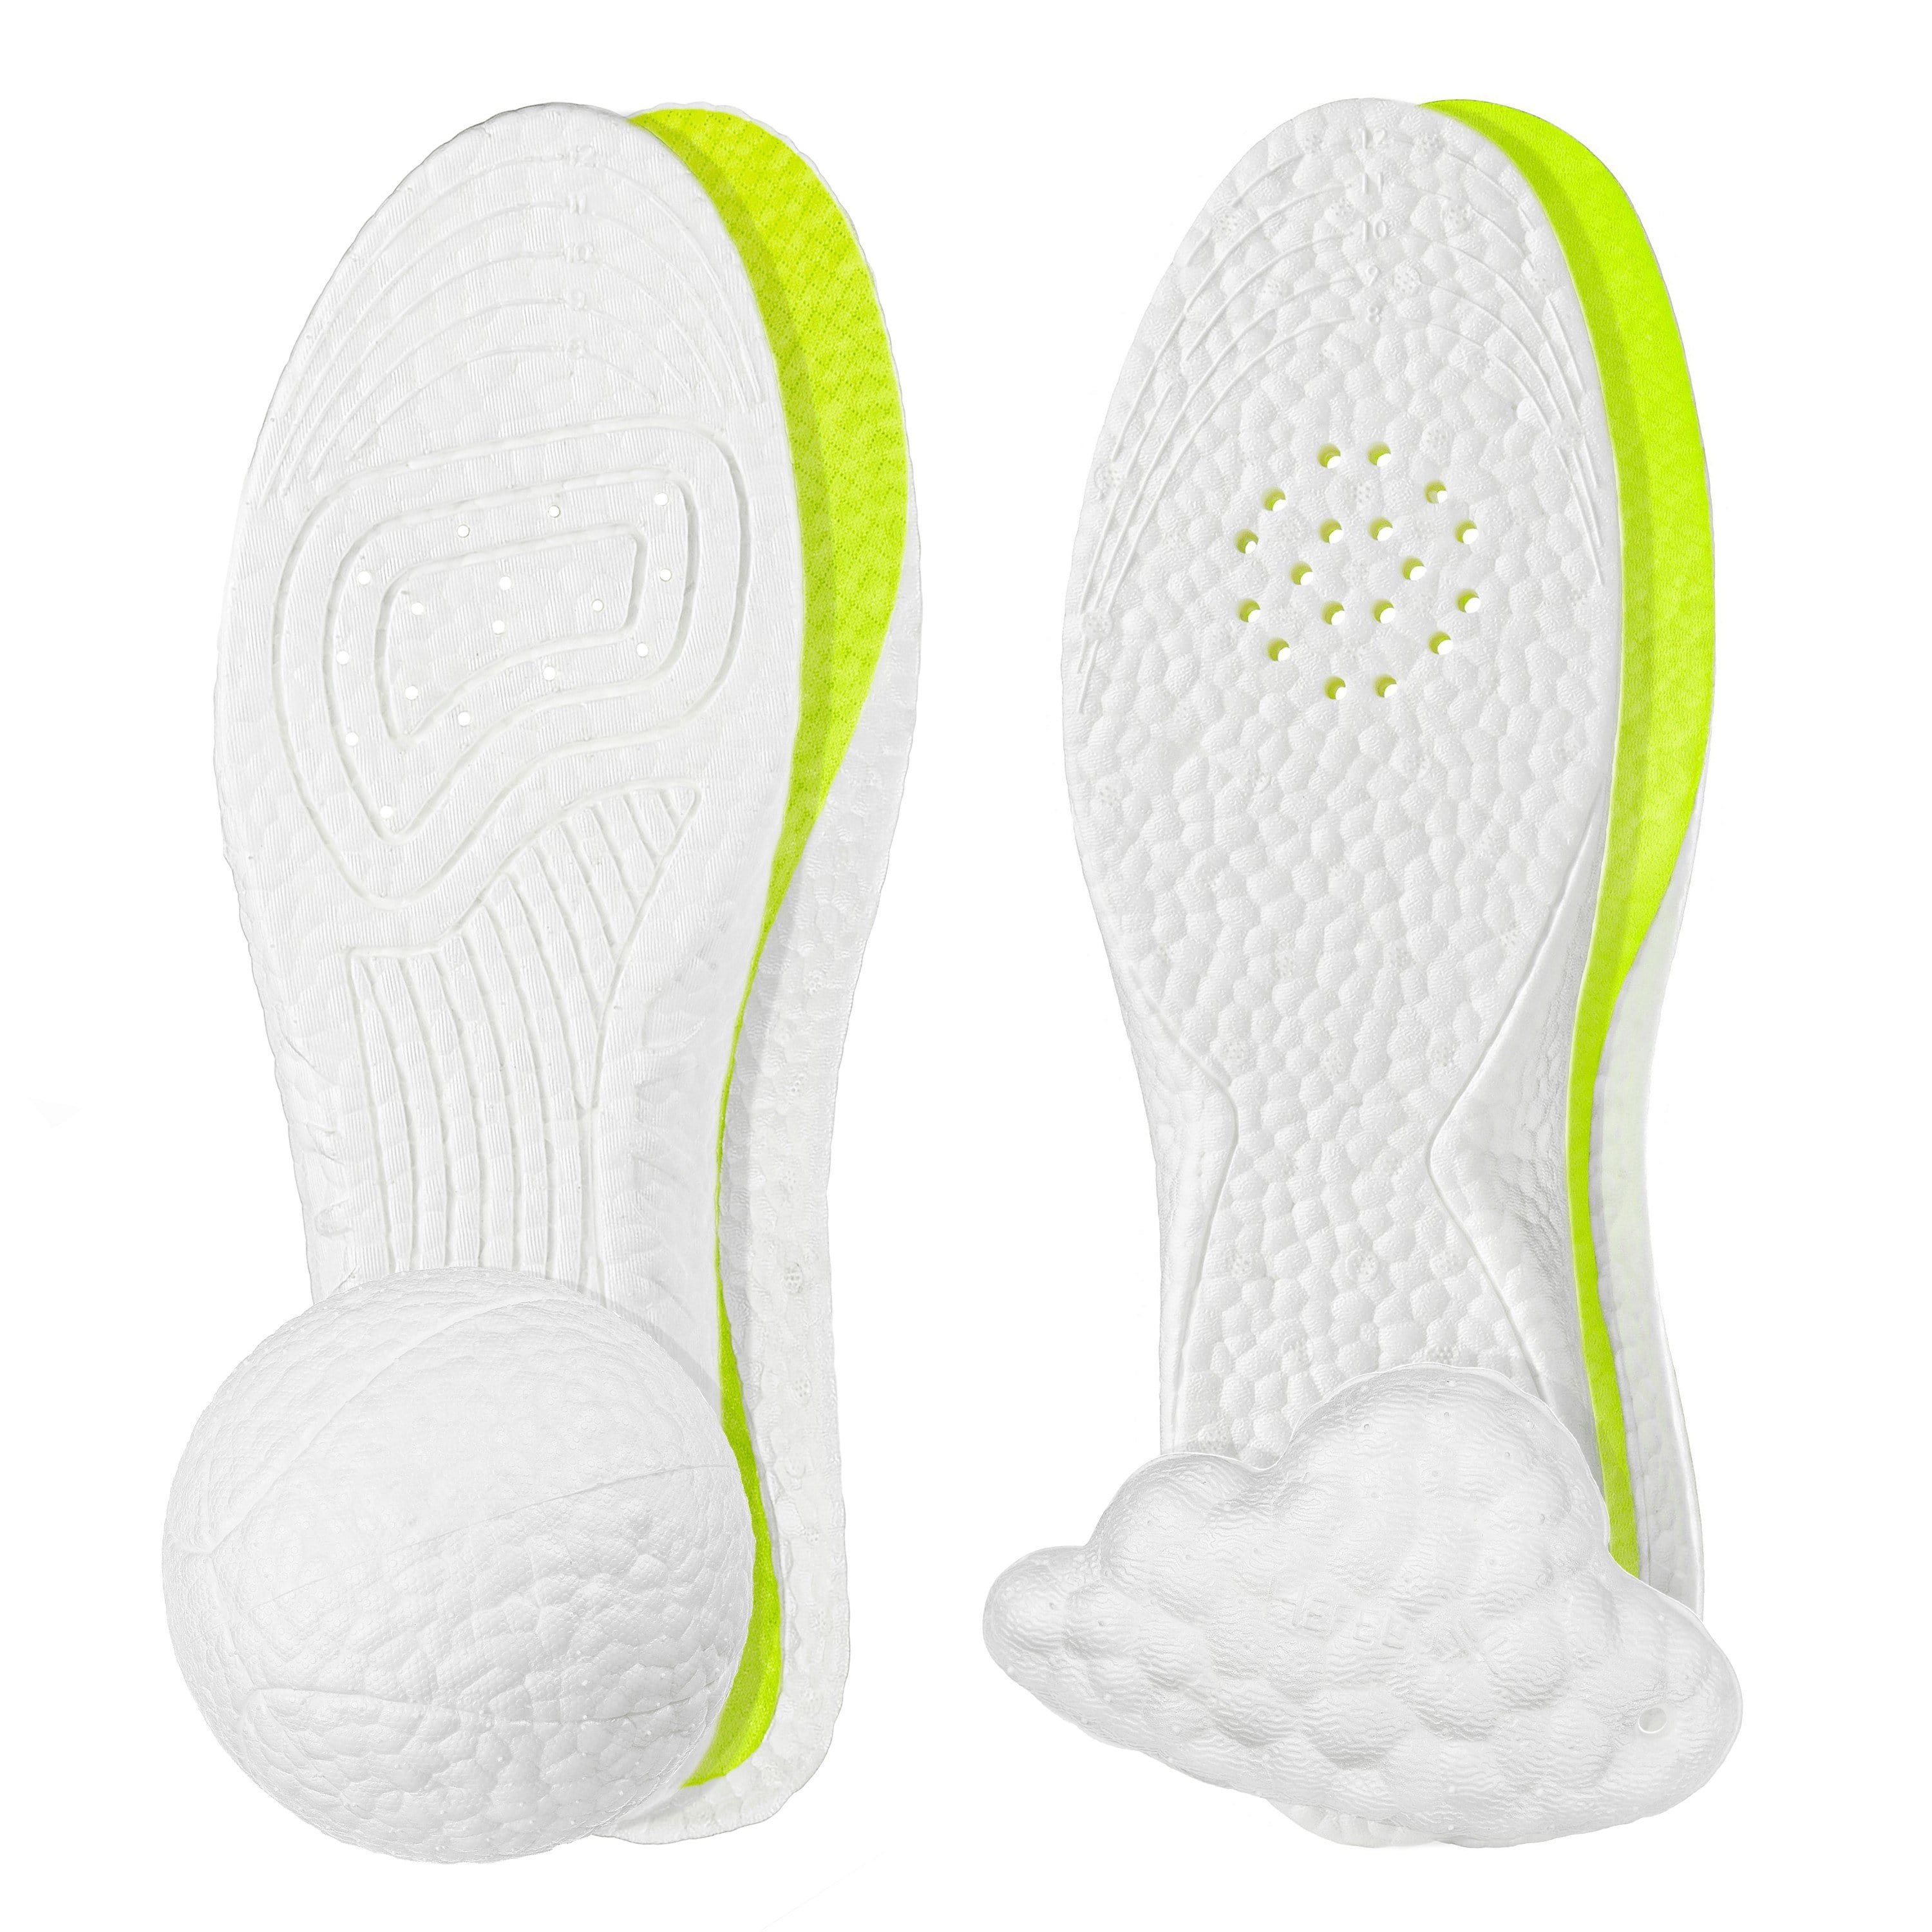 boost insole